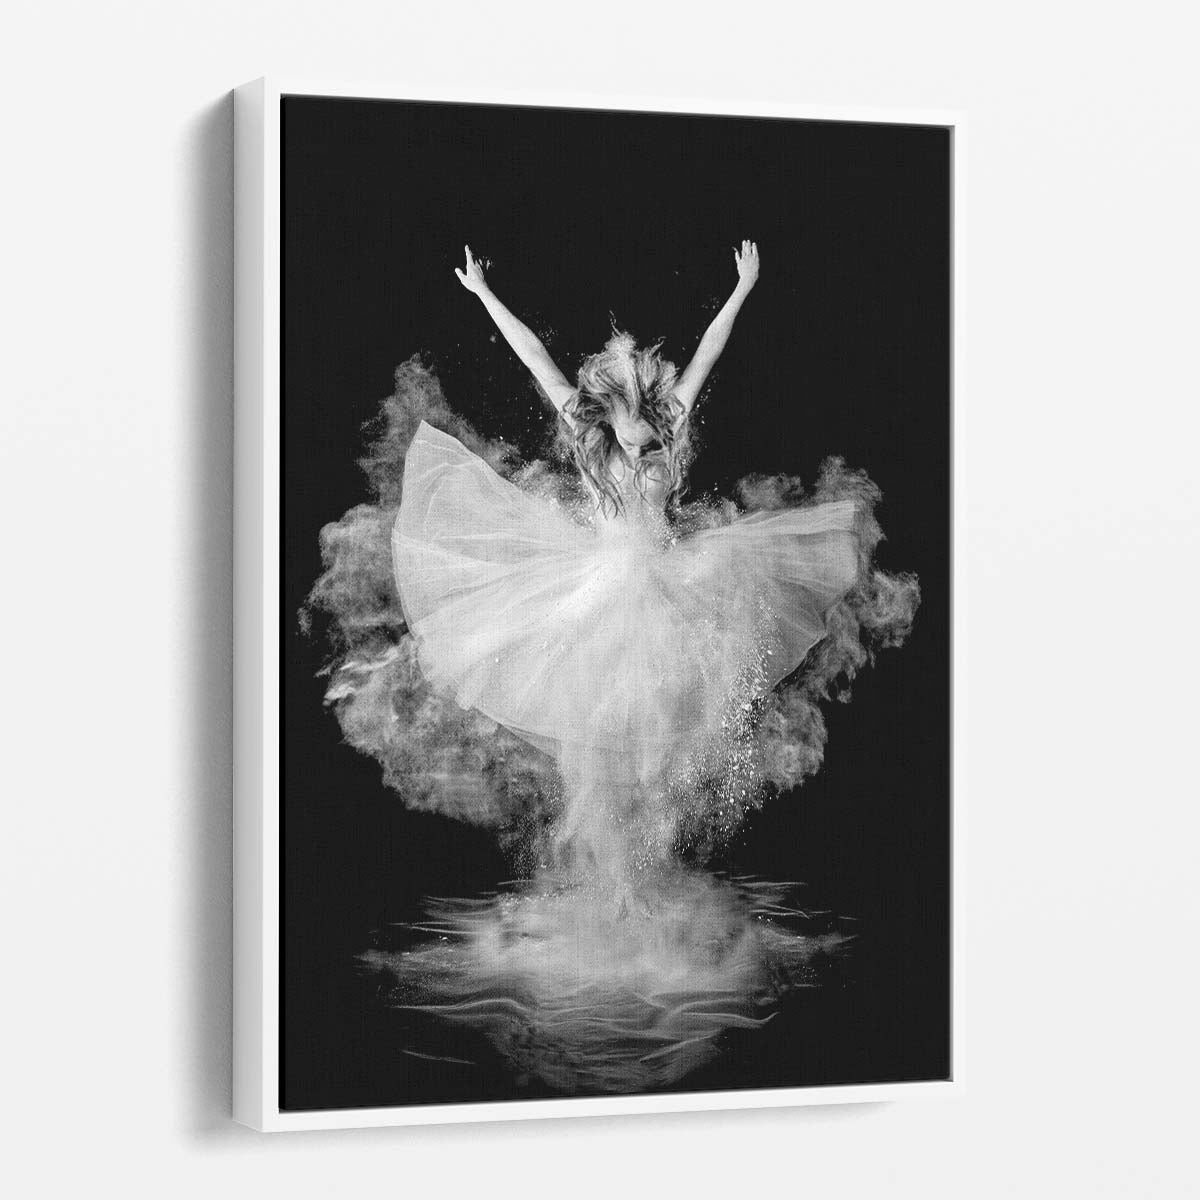 Angelic Ballerina Dance Explosion Monochrome Photography Wall Art by Luxuriance Designs, made in USA